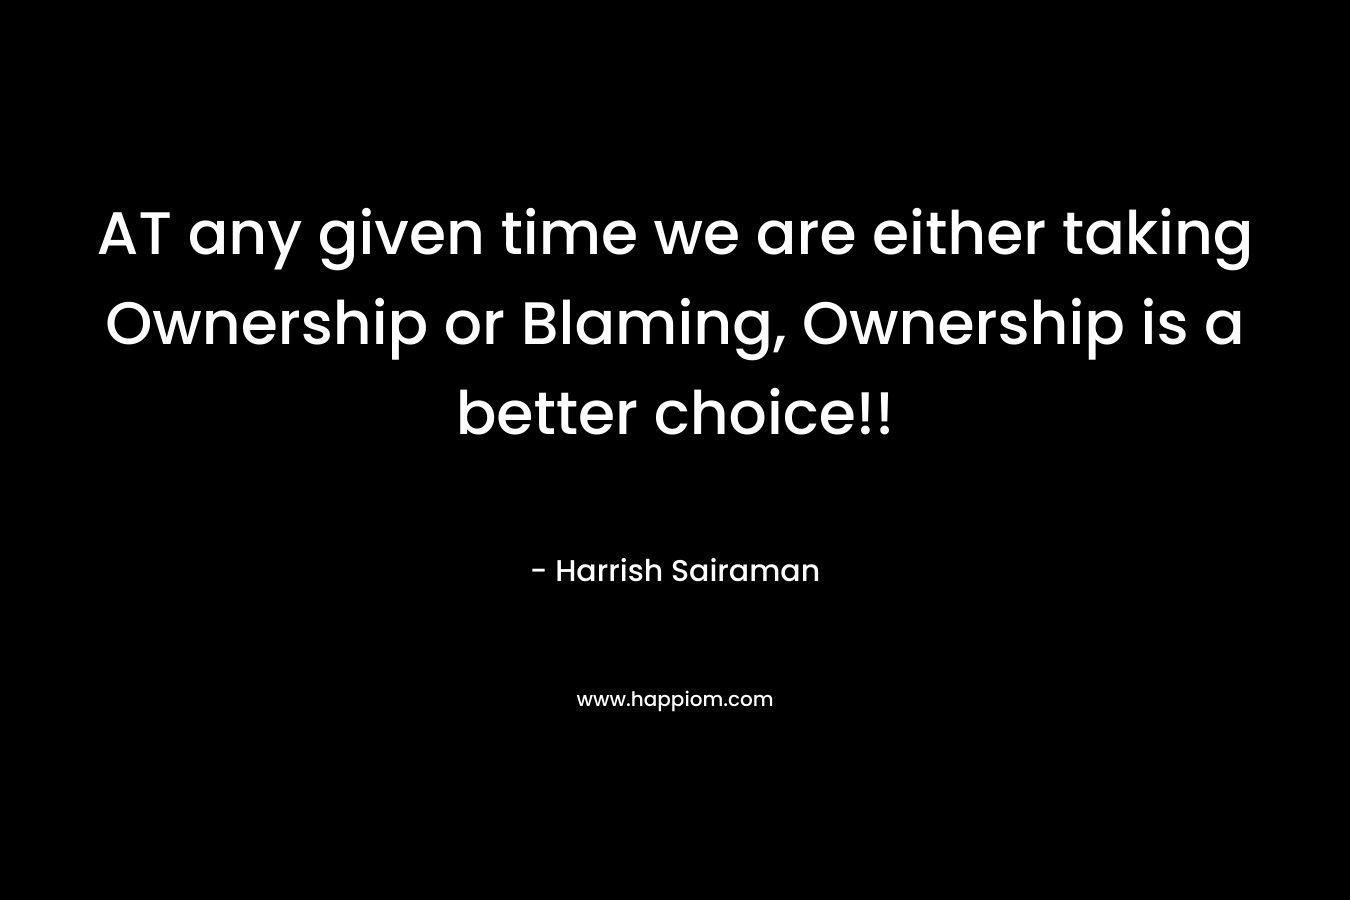 AT any given time we are either taking Ownership or Blaming, Ownership is a better choice!!